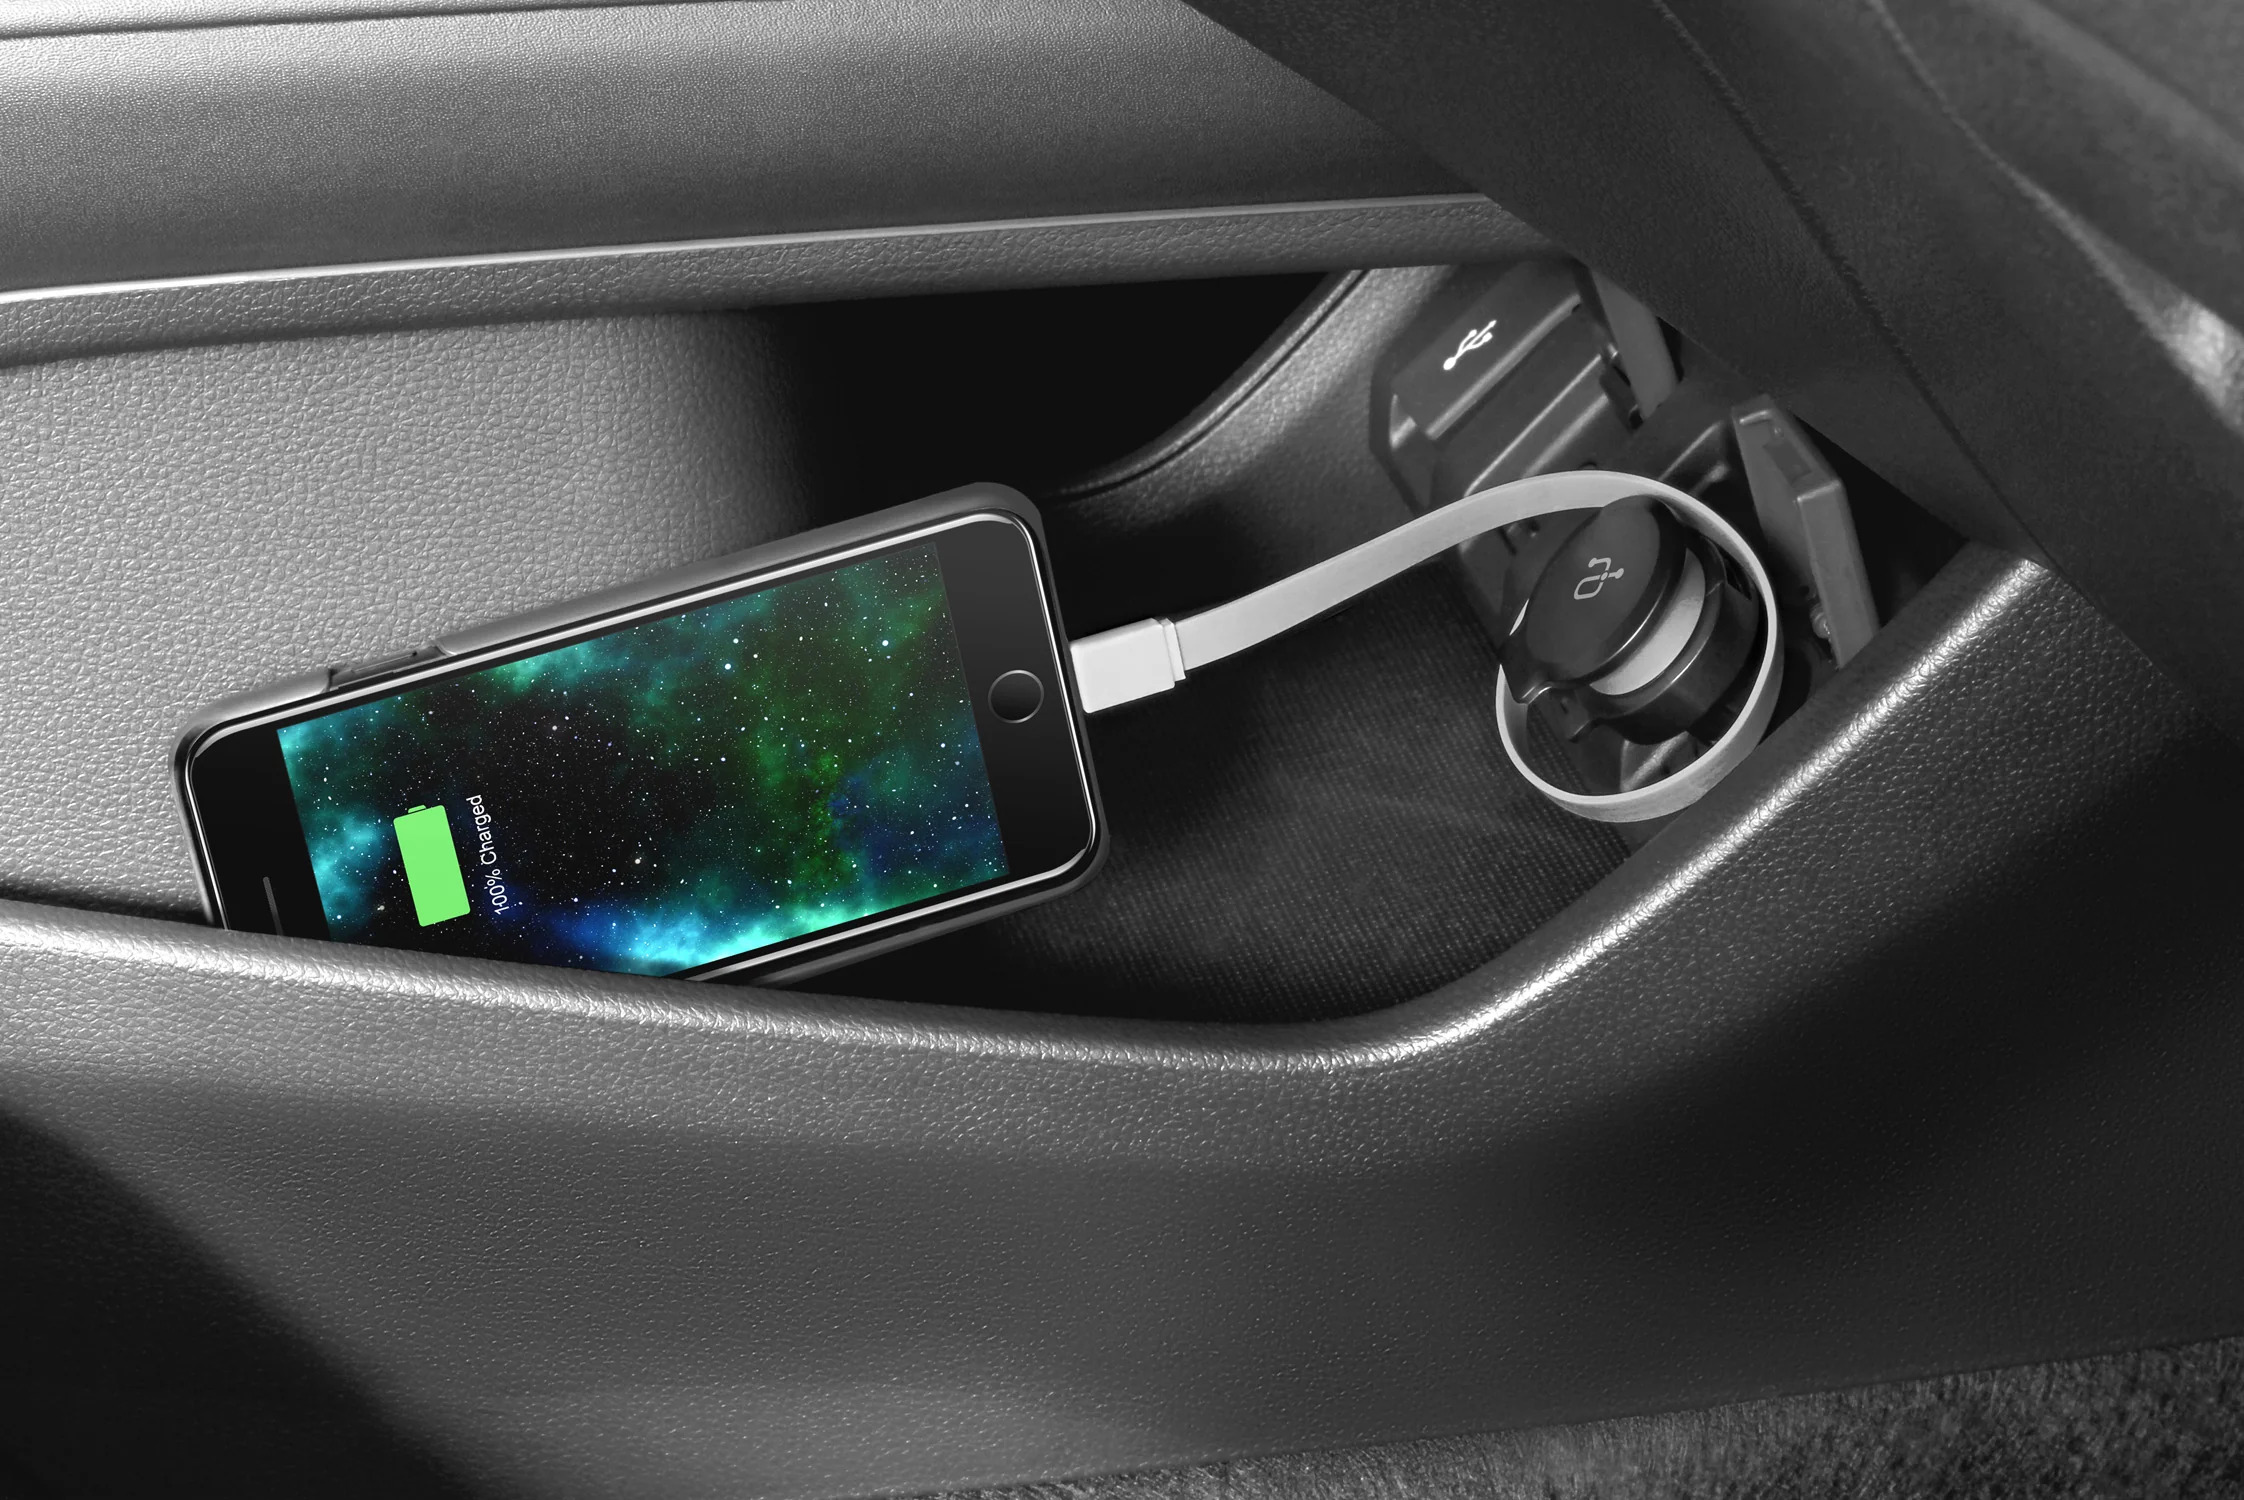 What To Do When Your Car’s USB Port Won’t Charge Your Phone